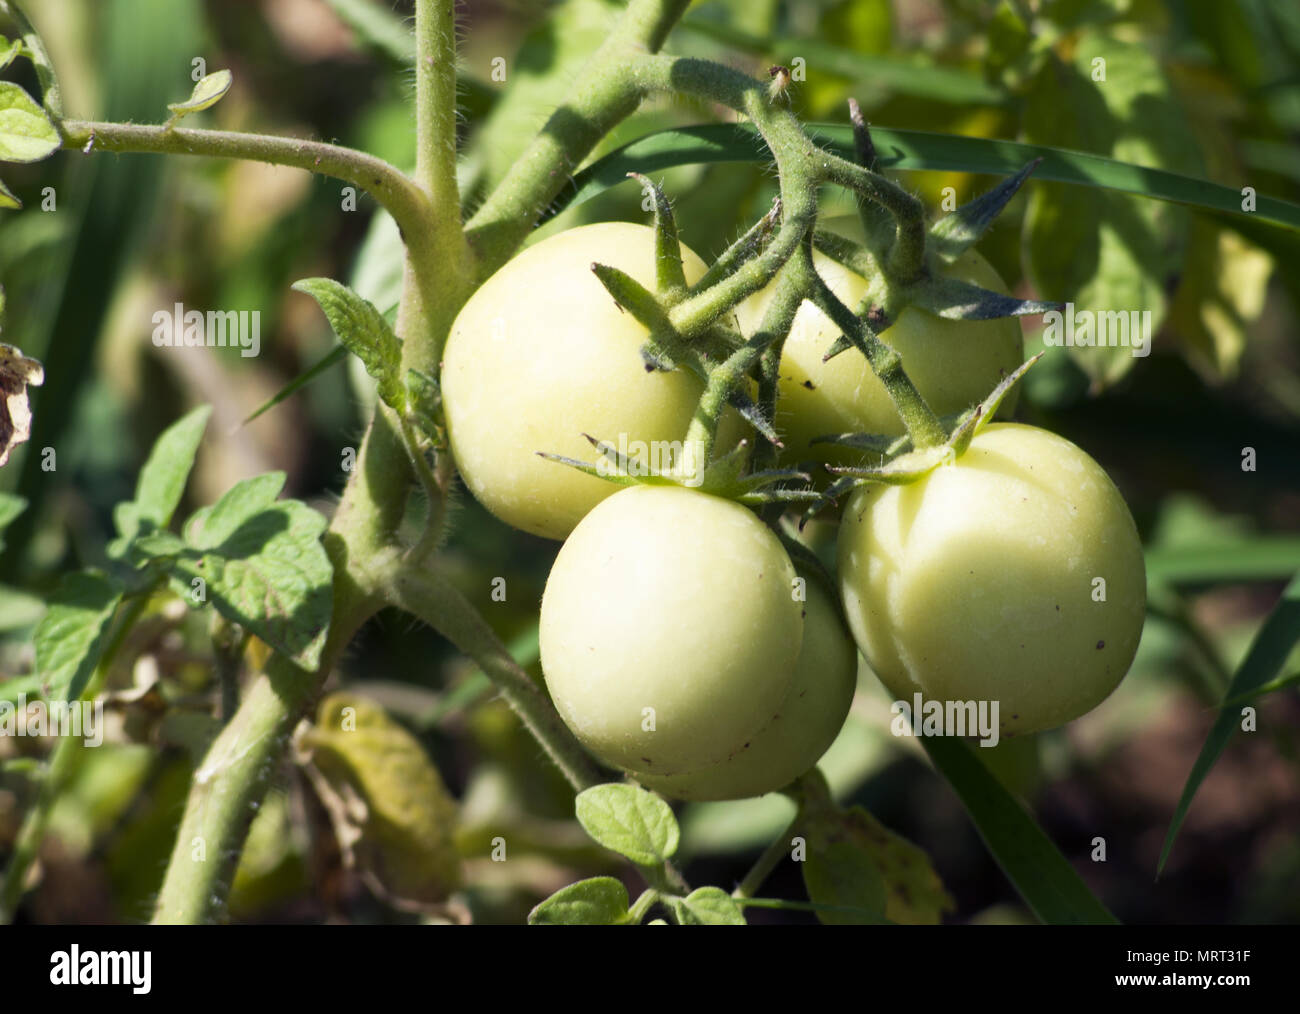 cluster of unripe tomato growing in the garden Stock Photo